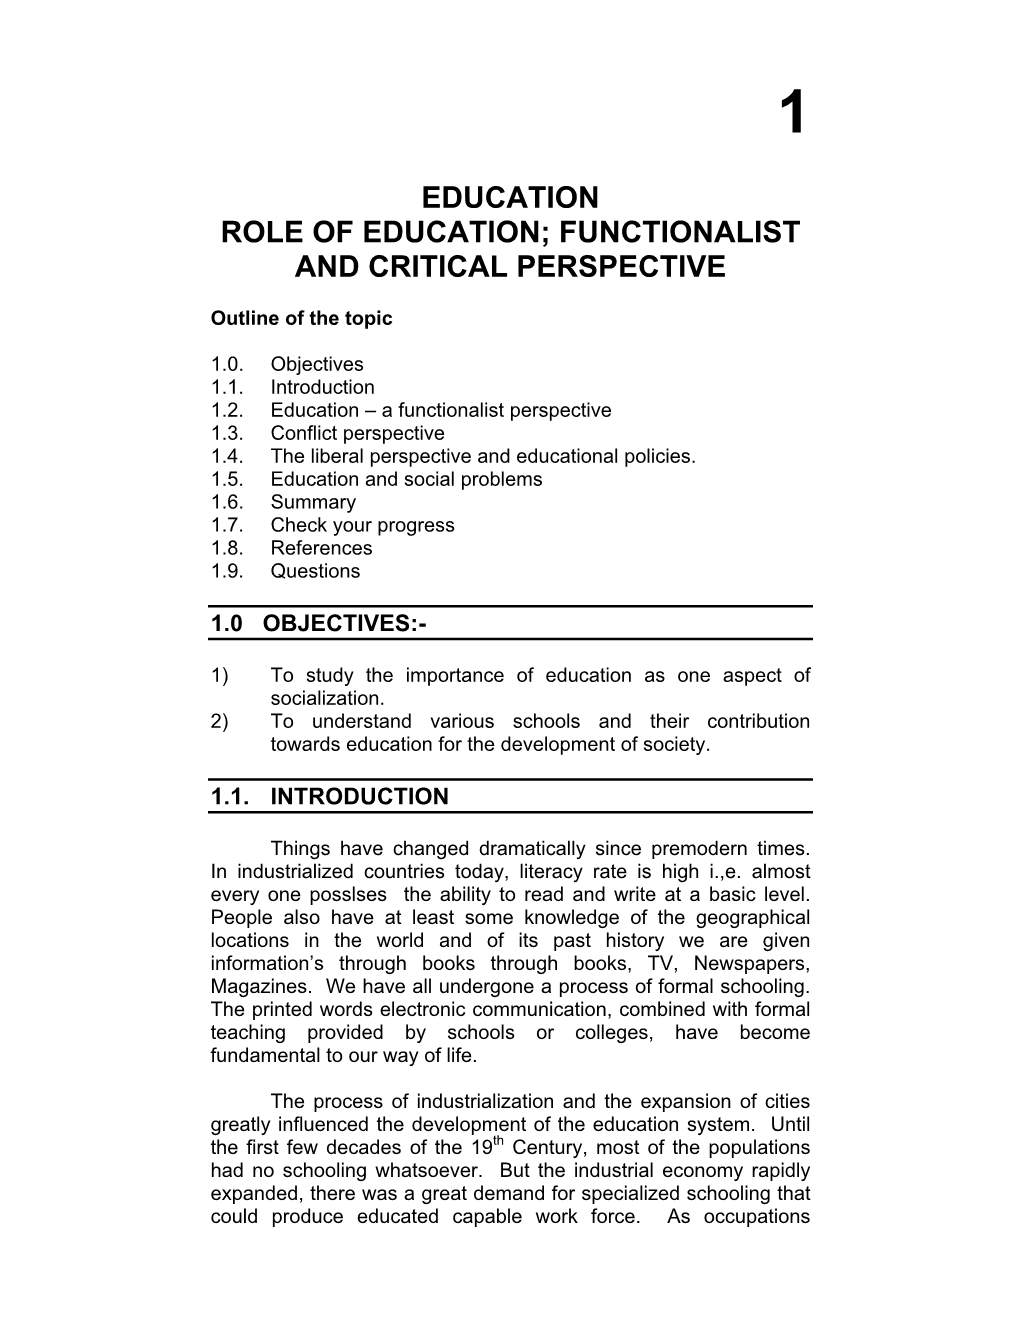 Education Role of Education; Functionalist and Critical Perspective